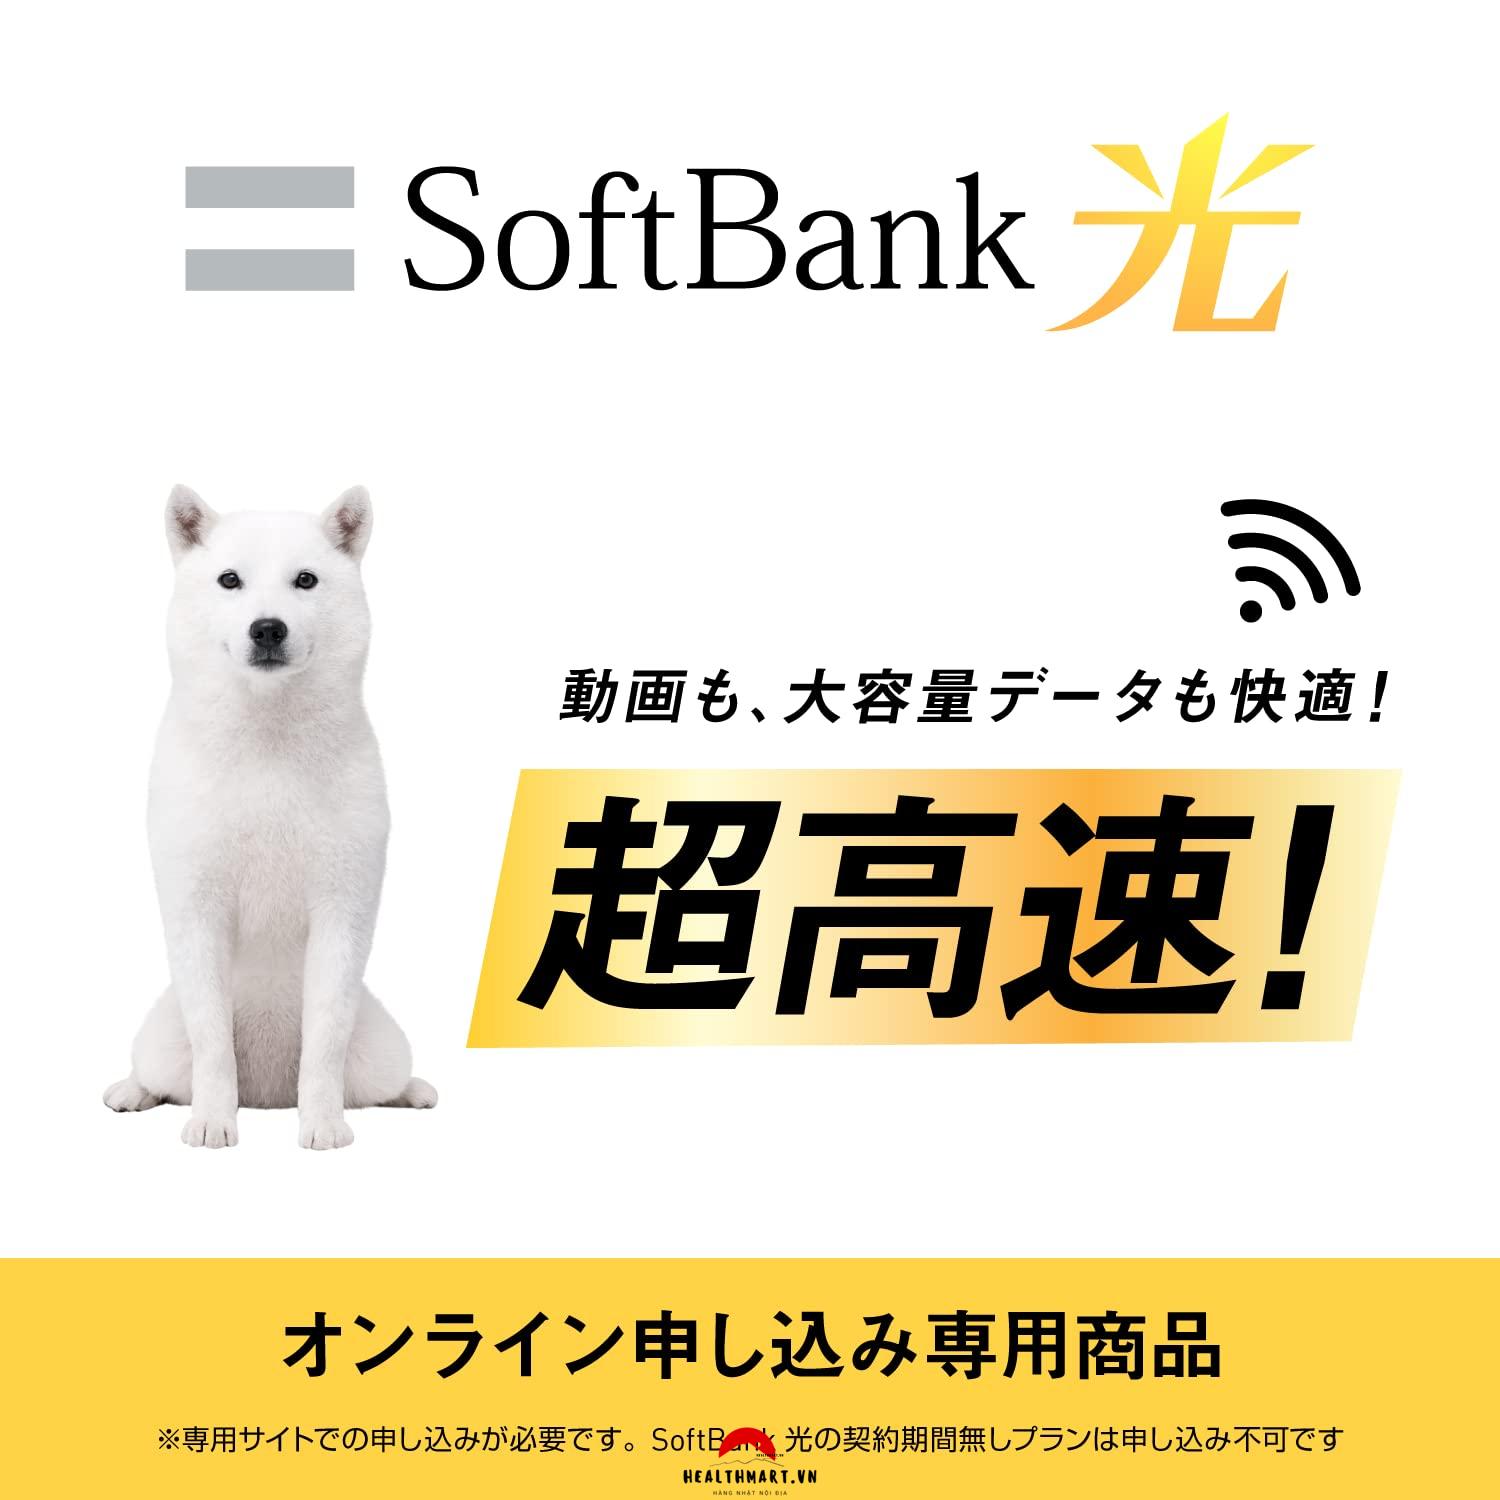 Mua SoftBank Light Application Entry Packaging, Unlimited Uses, No Construction Required for Frez Light and Collaboration Light trên Amazon Nhật chính hãng 2023 | Giaonhan247